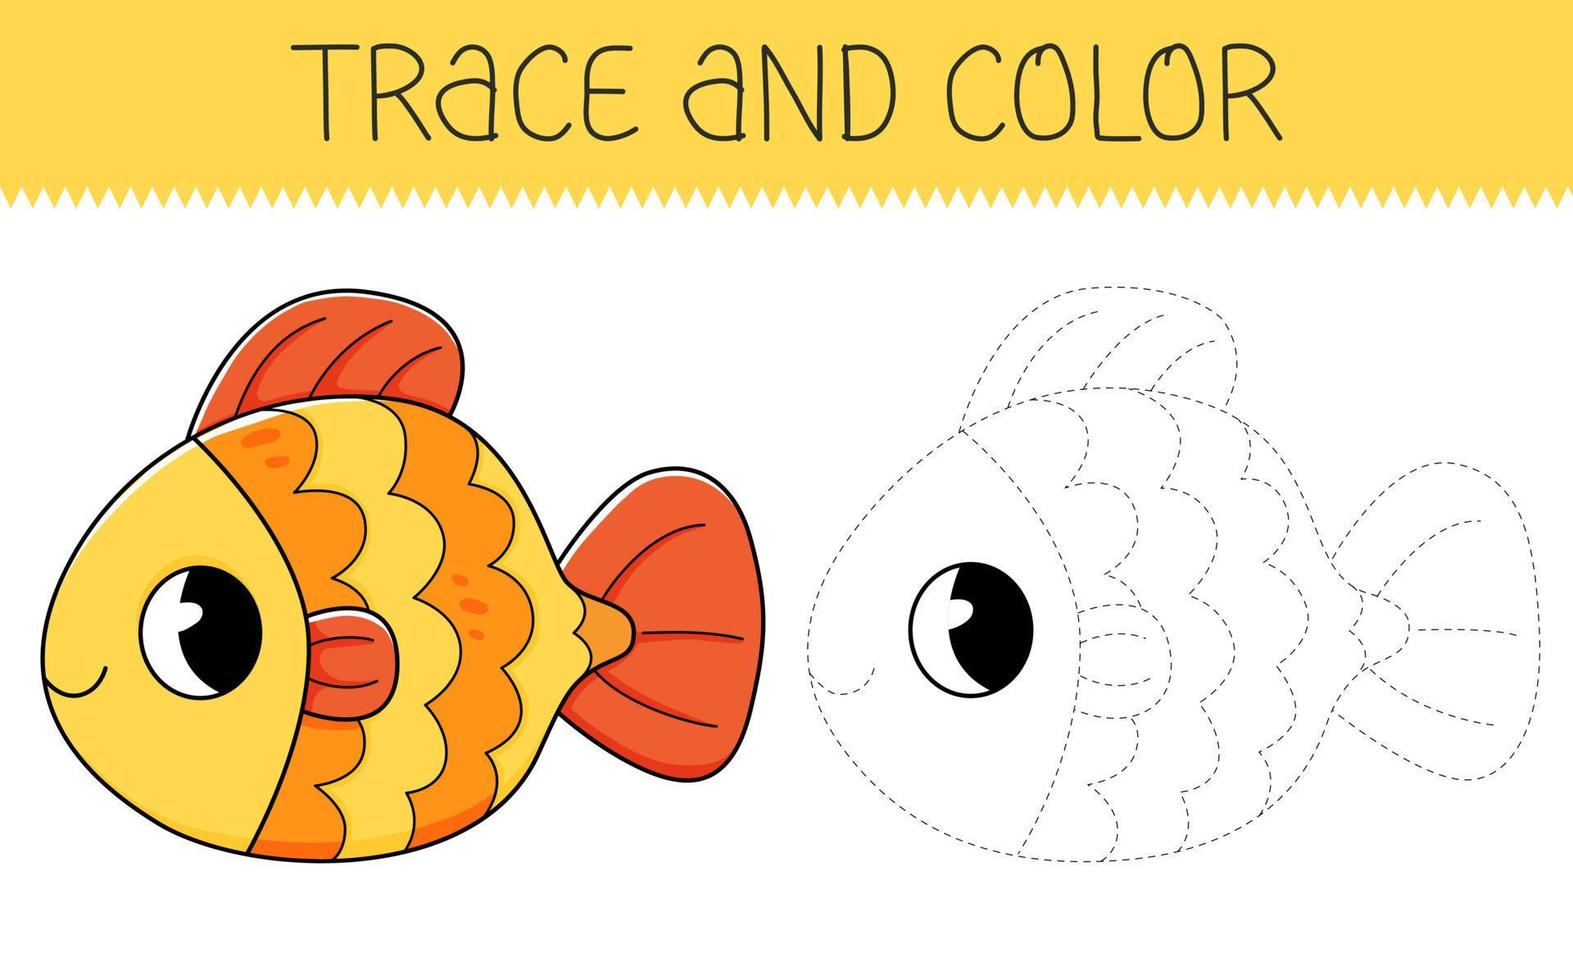 Trace and color coloring book with goldfish for kids. Coloring page with cartoon fish vector